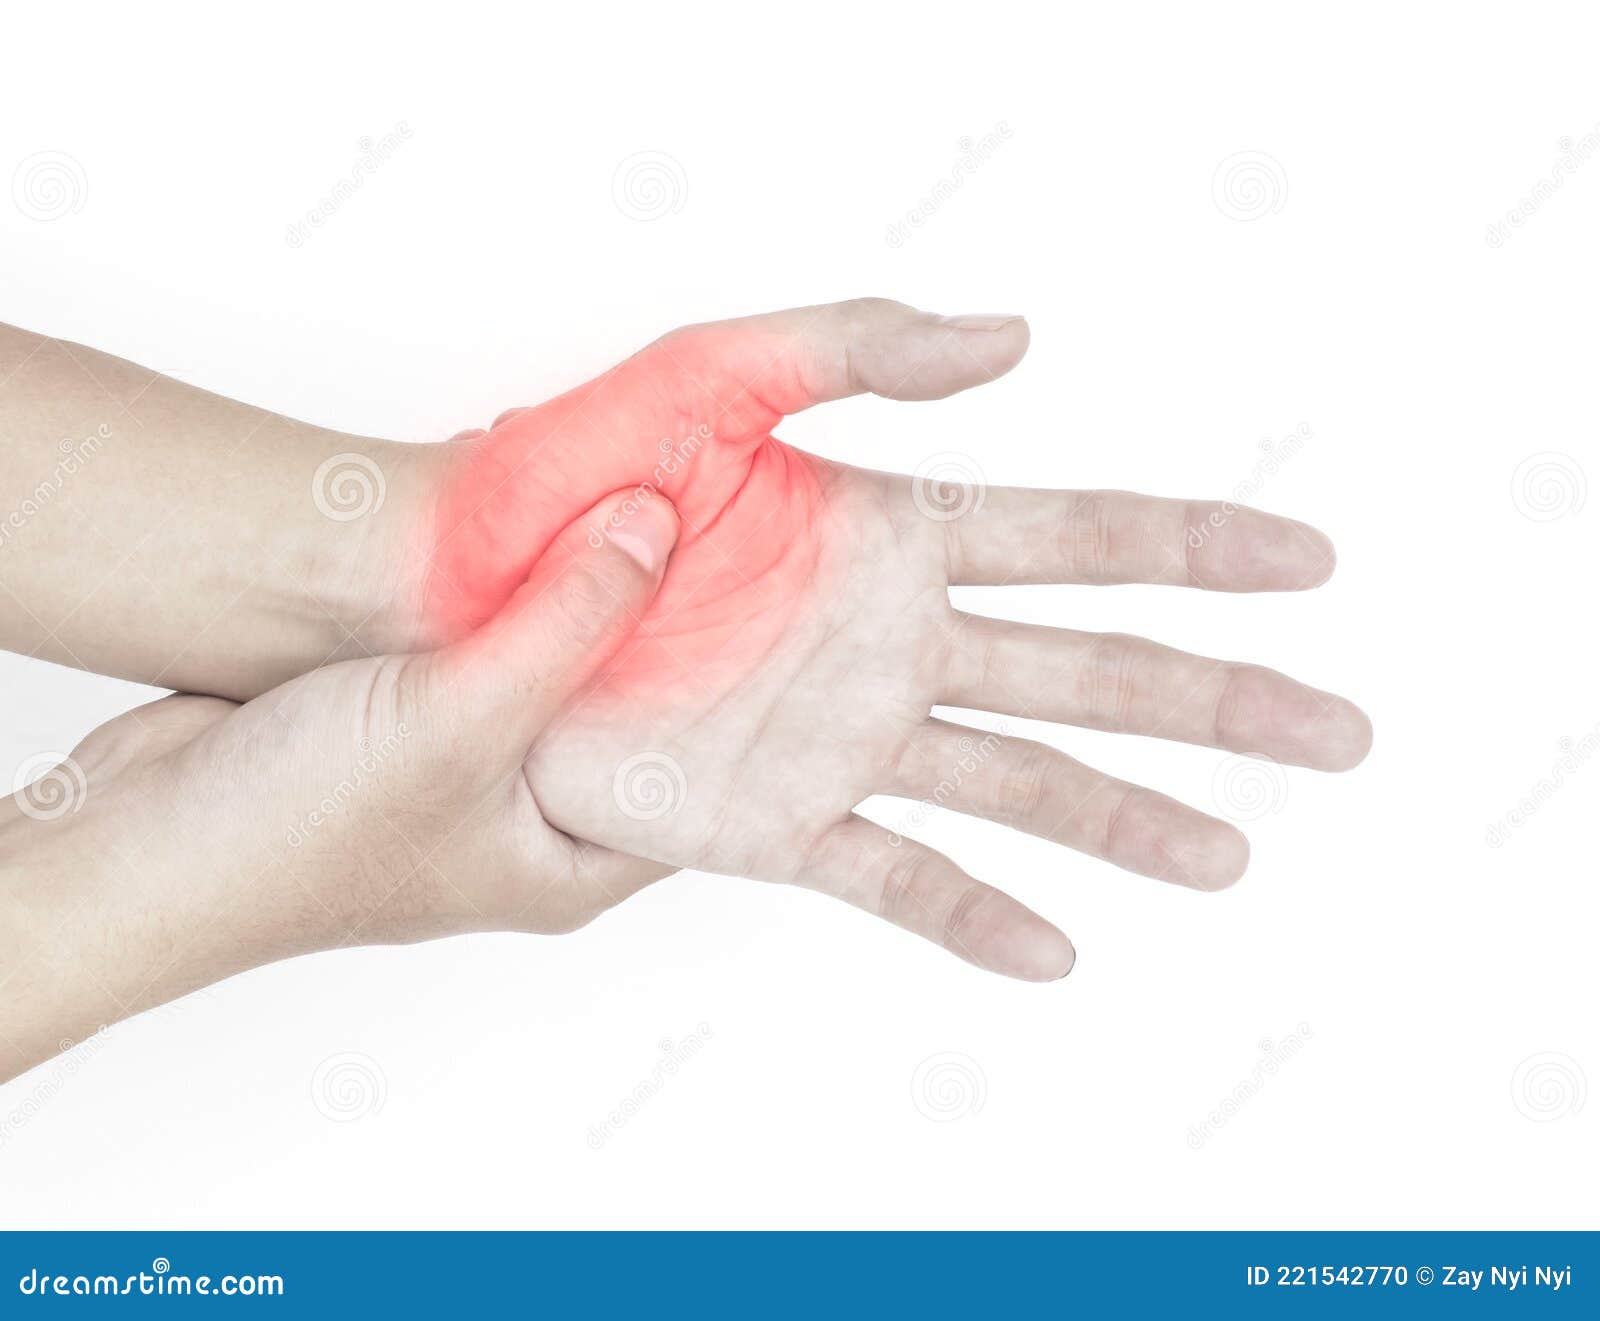 throbbing pain in palm of asian young man with diabetes. concept of cellulitis